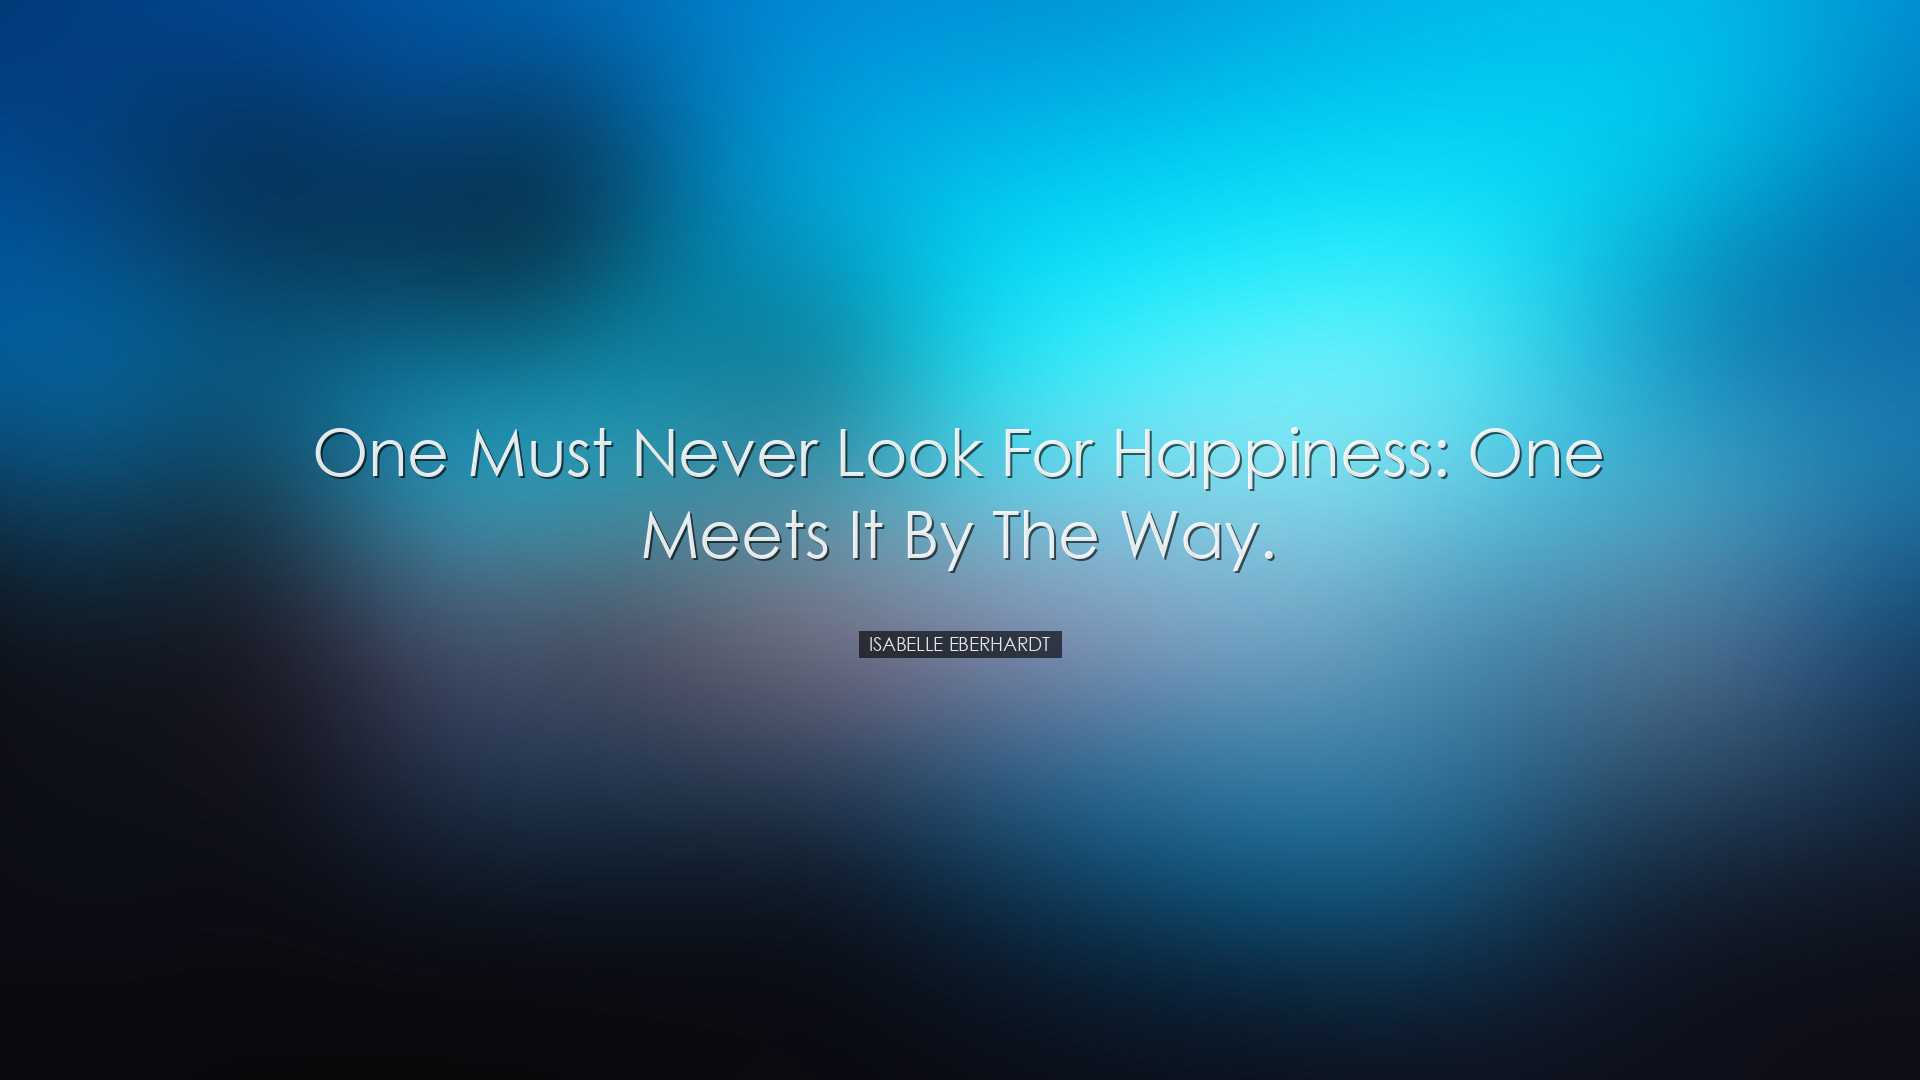 One must never look for happiness: one meets it by the way. - Isab